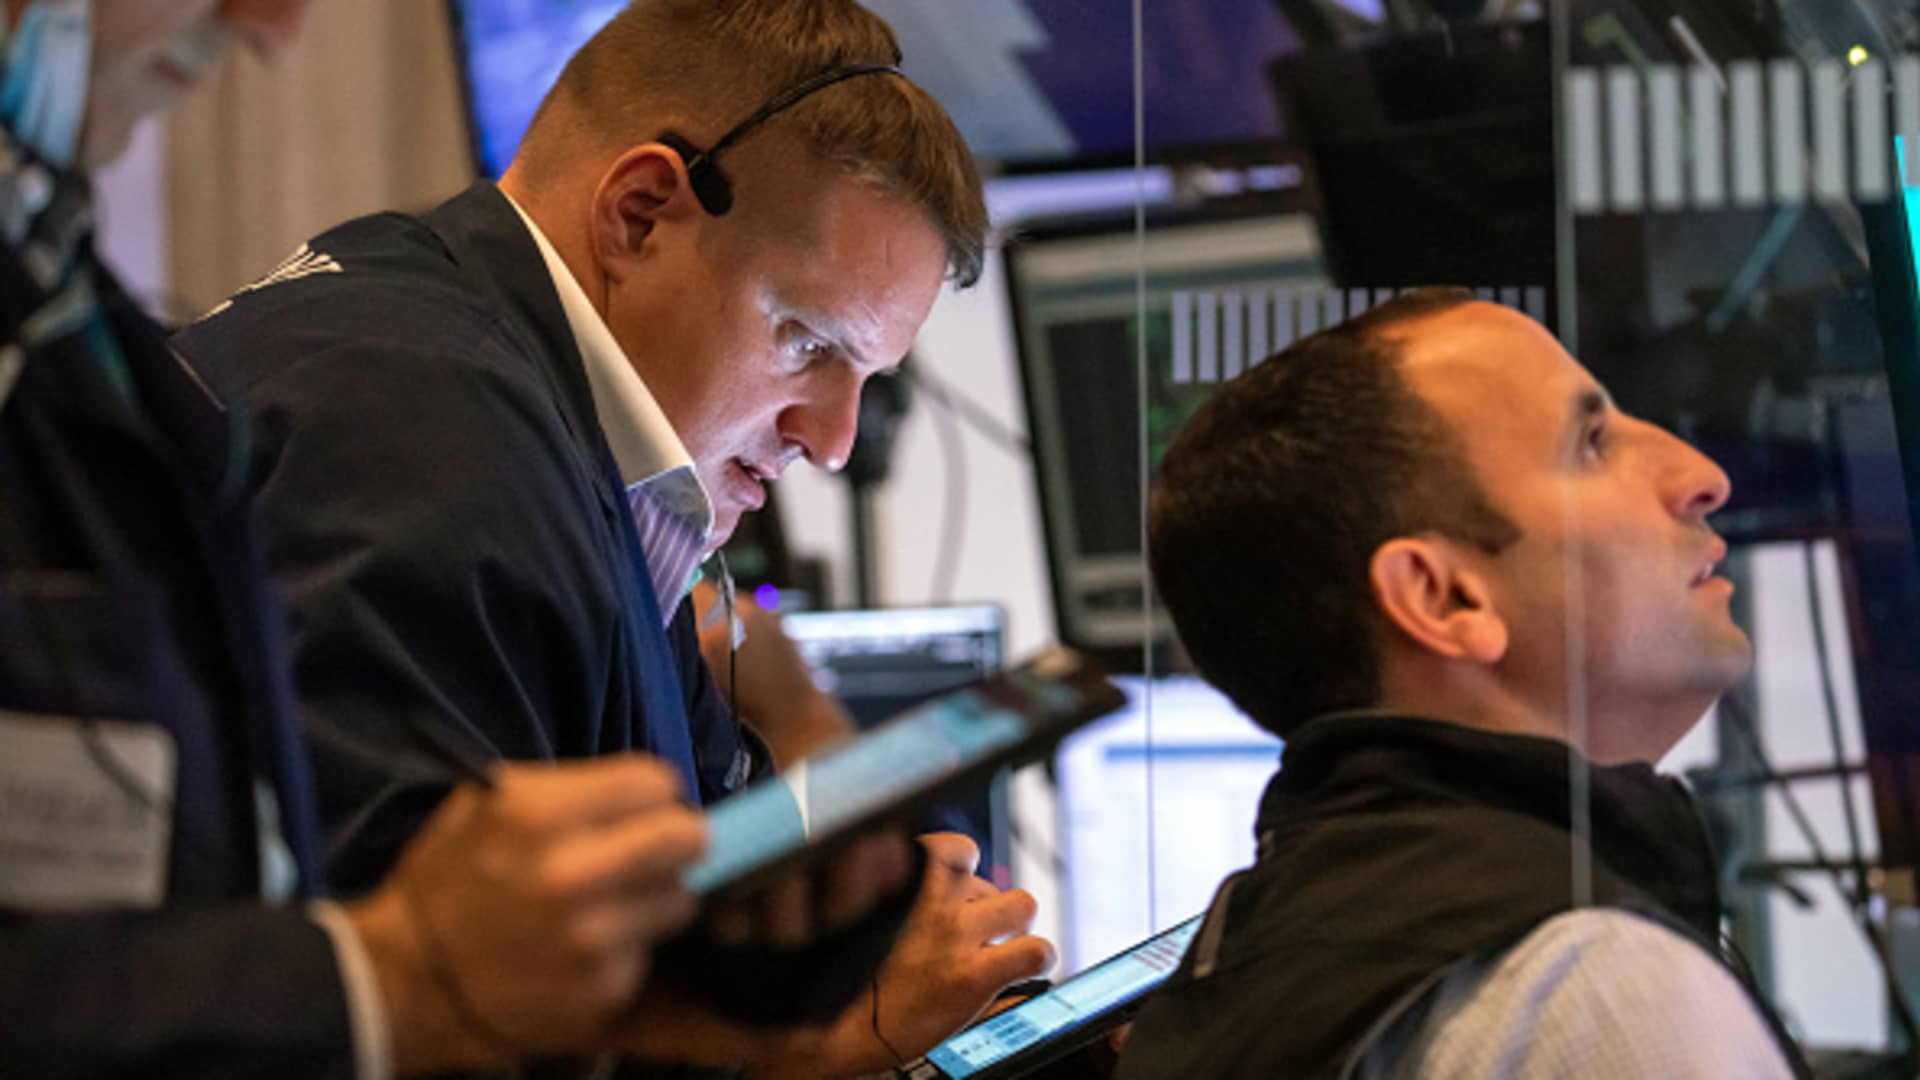 Traders work on the floor of the New York Stock Exchange (NYSE) in New York, on Monday, Aug. 23, 2021.